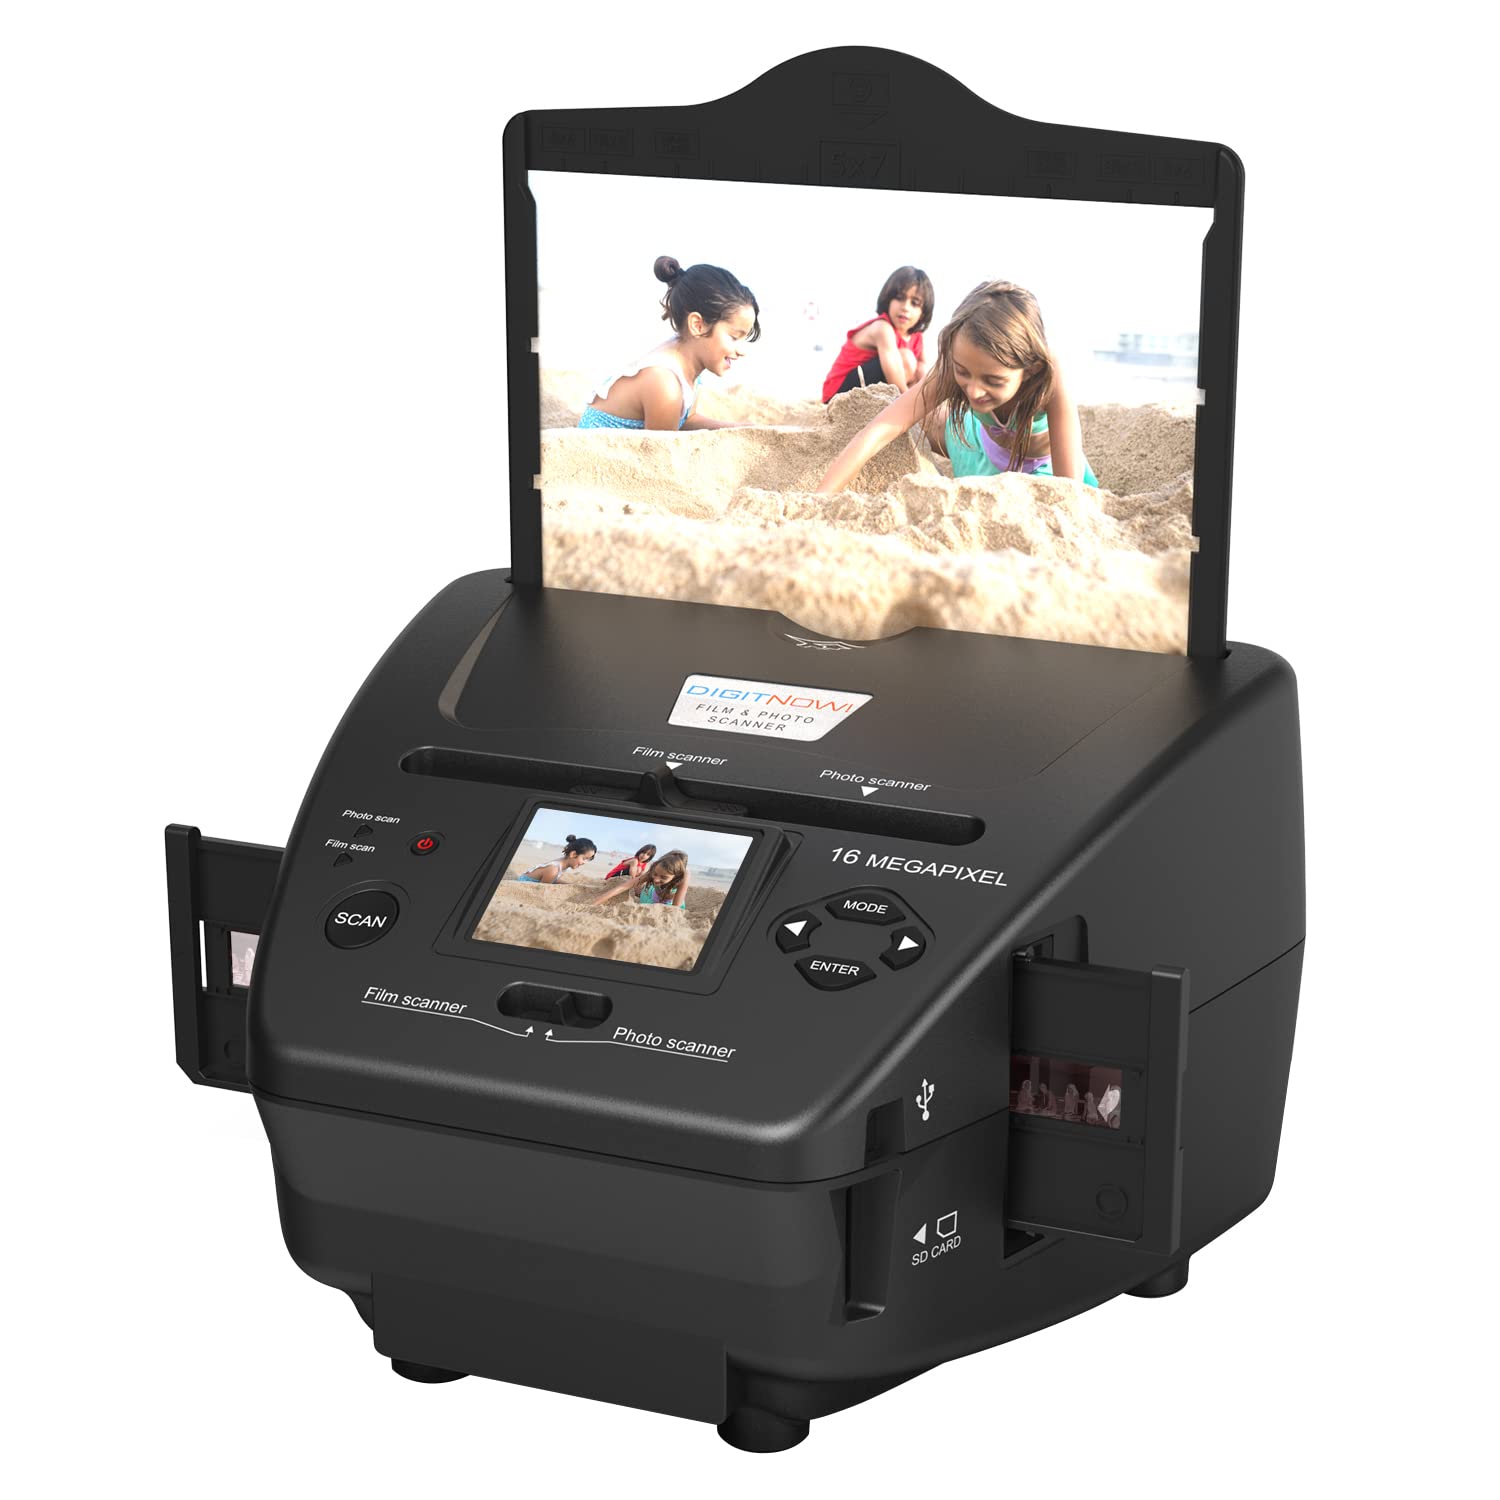 All-in-One High Resolution 16MP Film Scanner with 2.4 LCD Screen